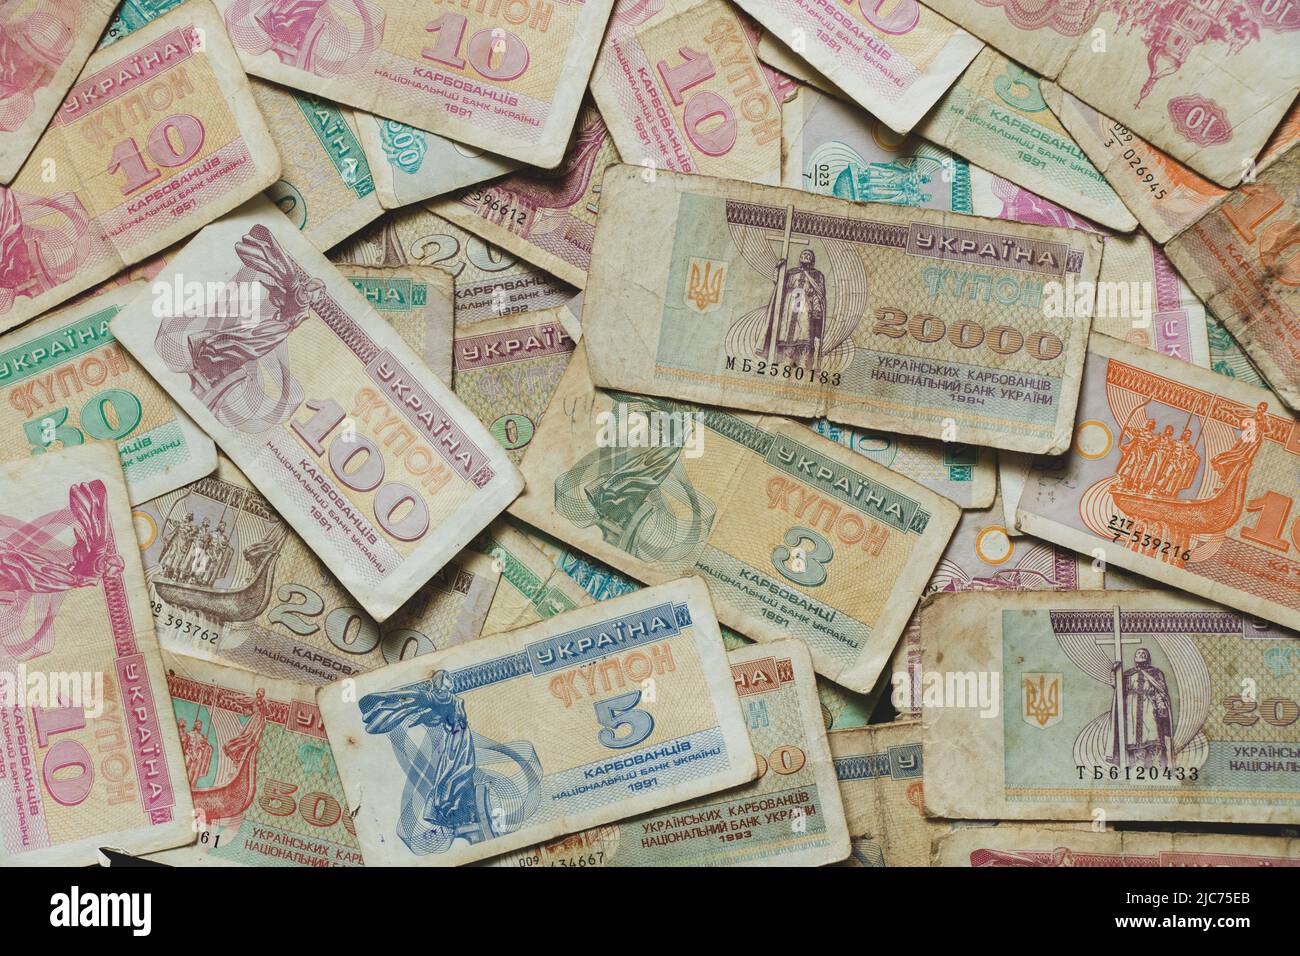 monetary unit of the Ukrainian state karbovanets different namenals lie on the table as a background, old money of ukraine, ukrainian money Stock Photo